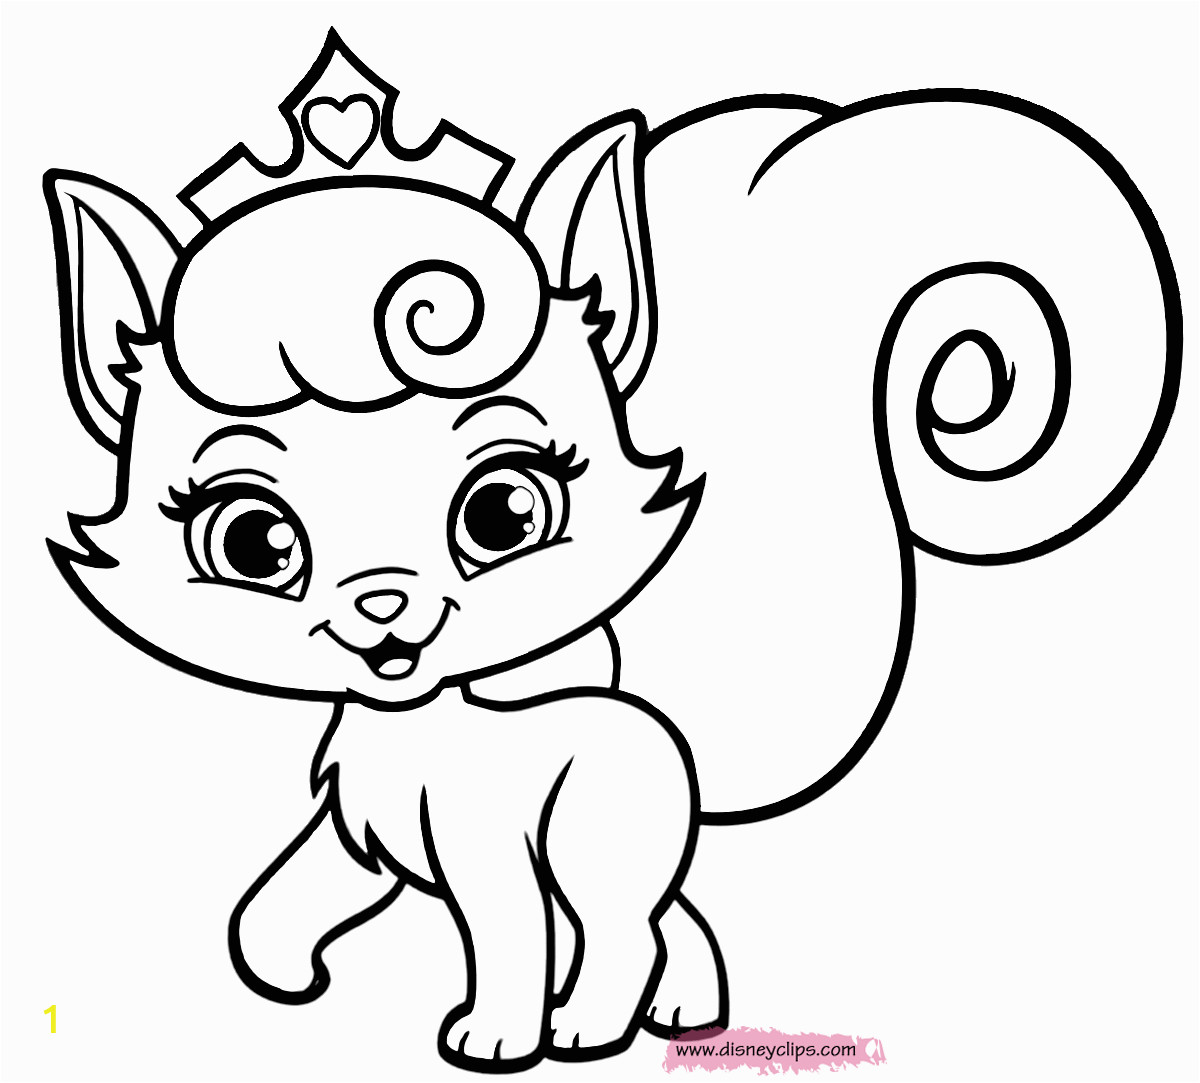 Free Coloring Pages Of Kittens and Puppies Kitten and Puppy Coloring Pages to Print Coloring Home